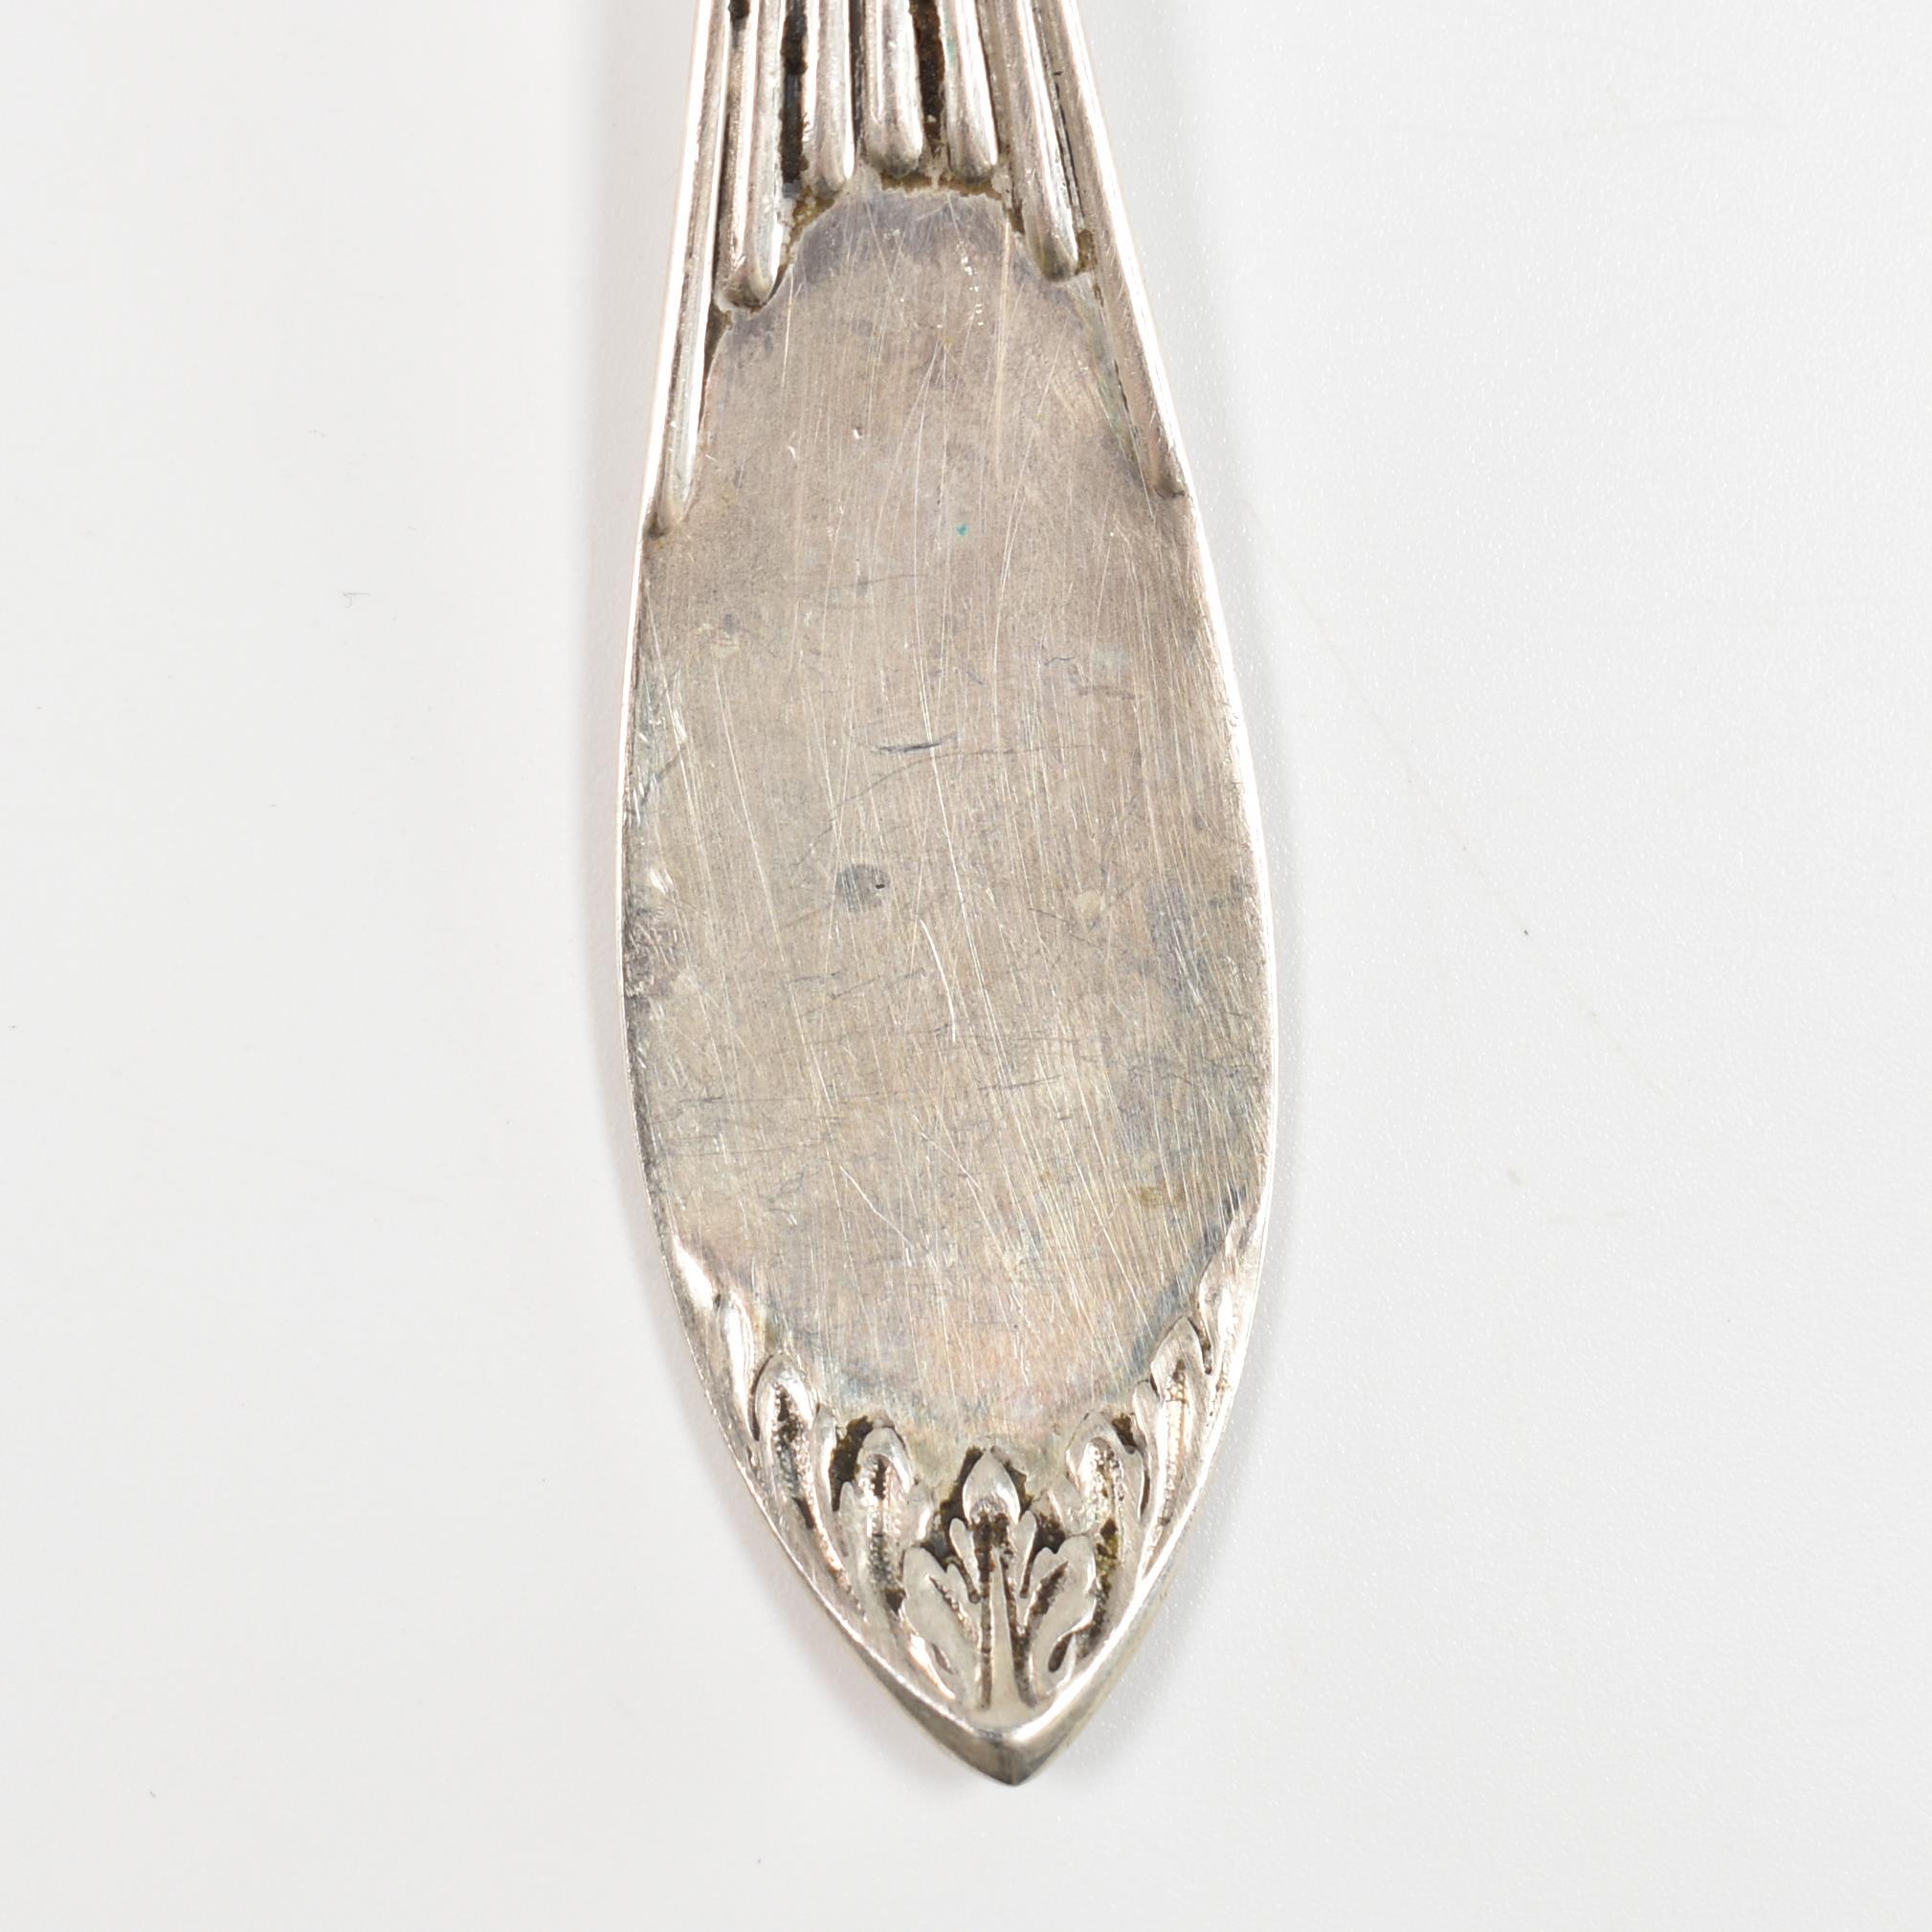 FOUR 19TH CENTURY SILVER SPOONS - Image 9 of 10